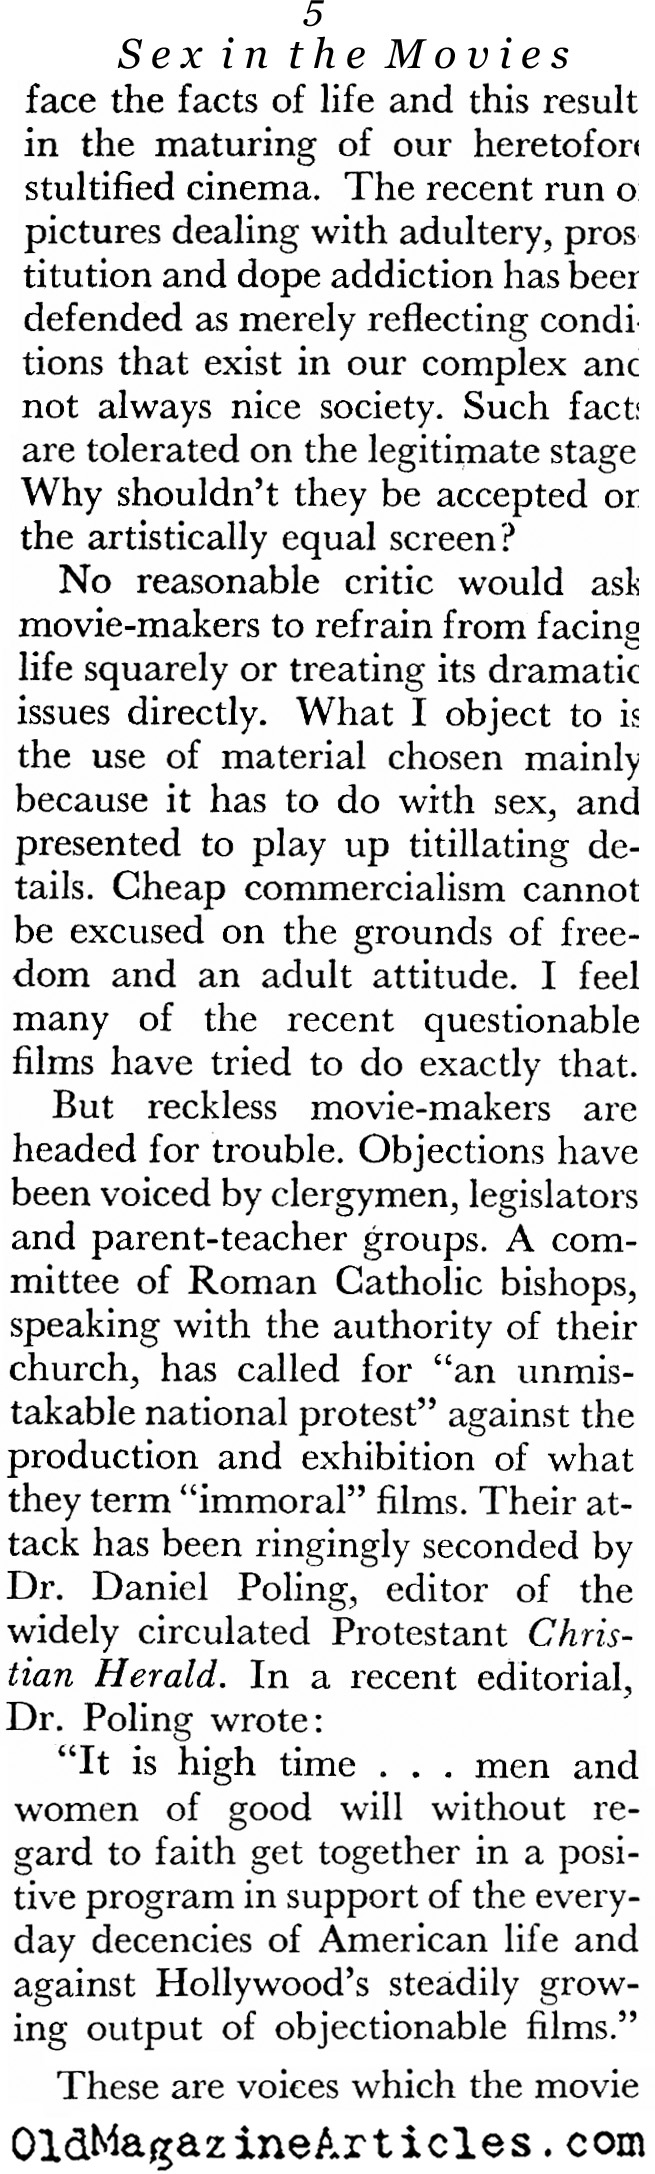 Introducing Sex in the Movies (Coronet Magazine, 1961)